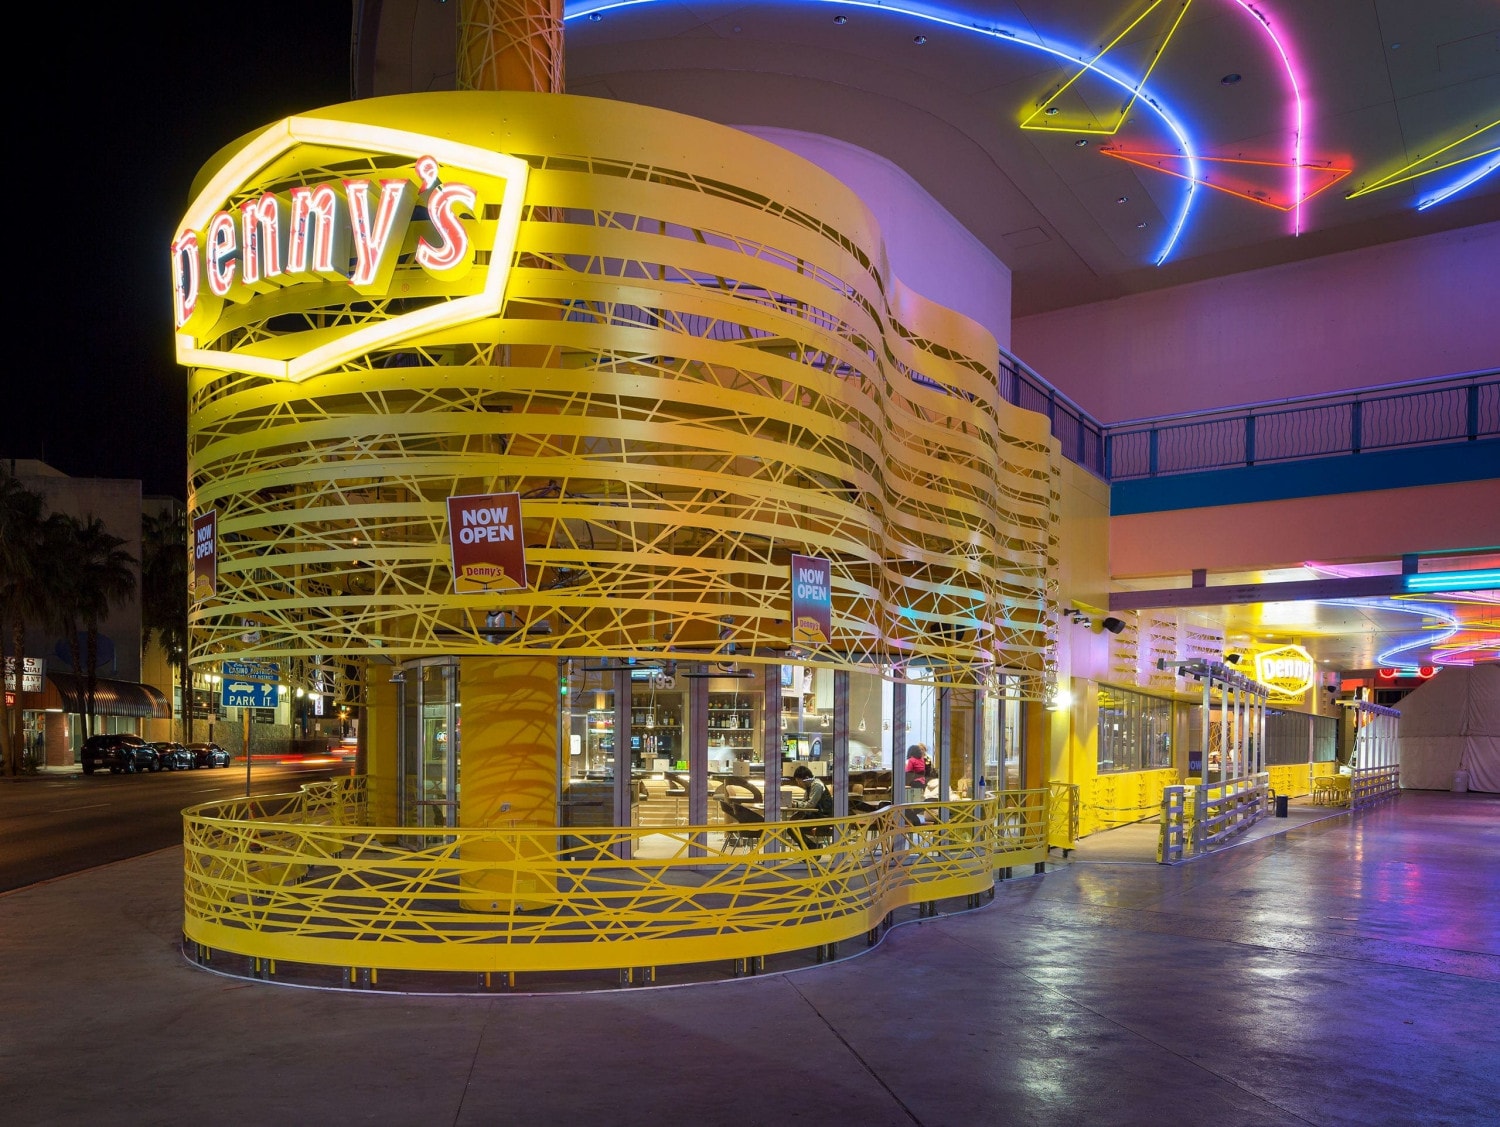 Photograph of the completed Denny's Flagship Diner / Early rendering of the desgin.